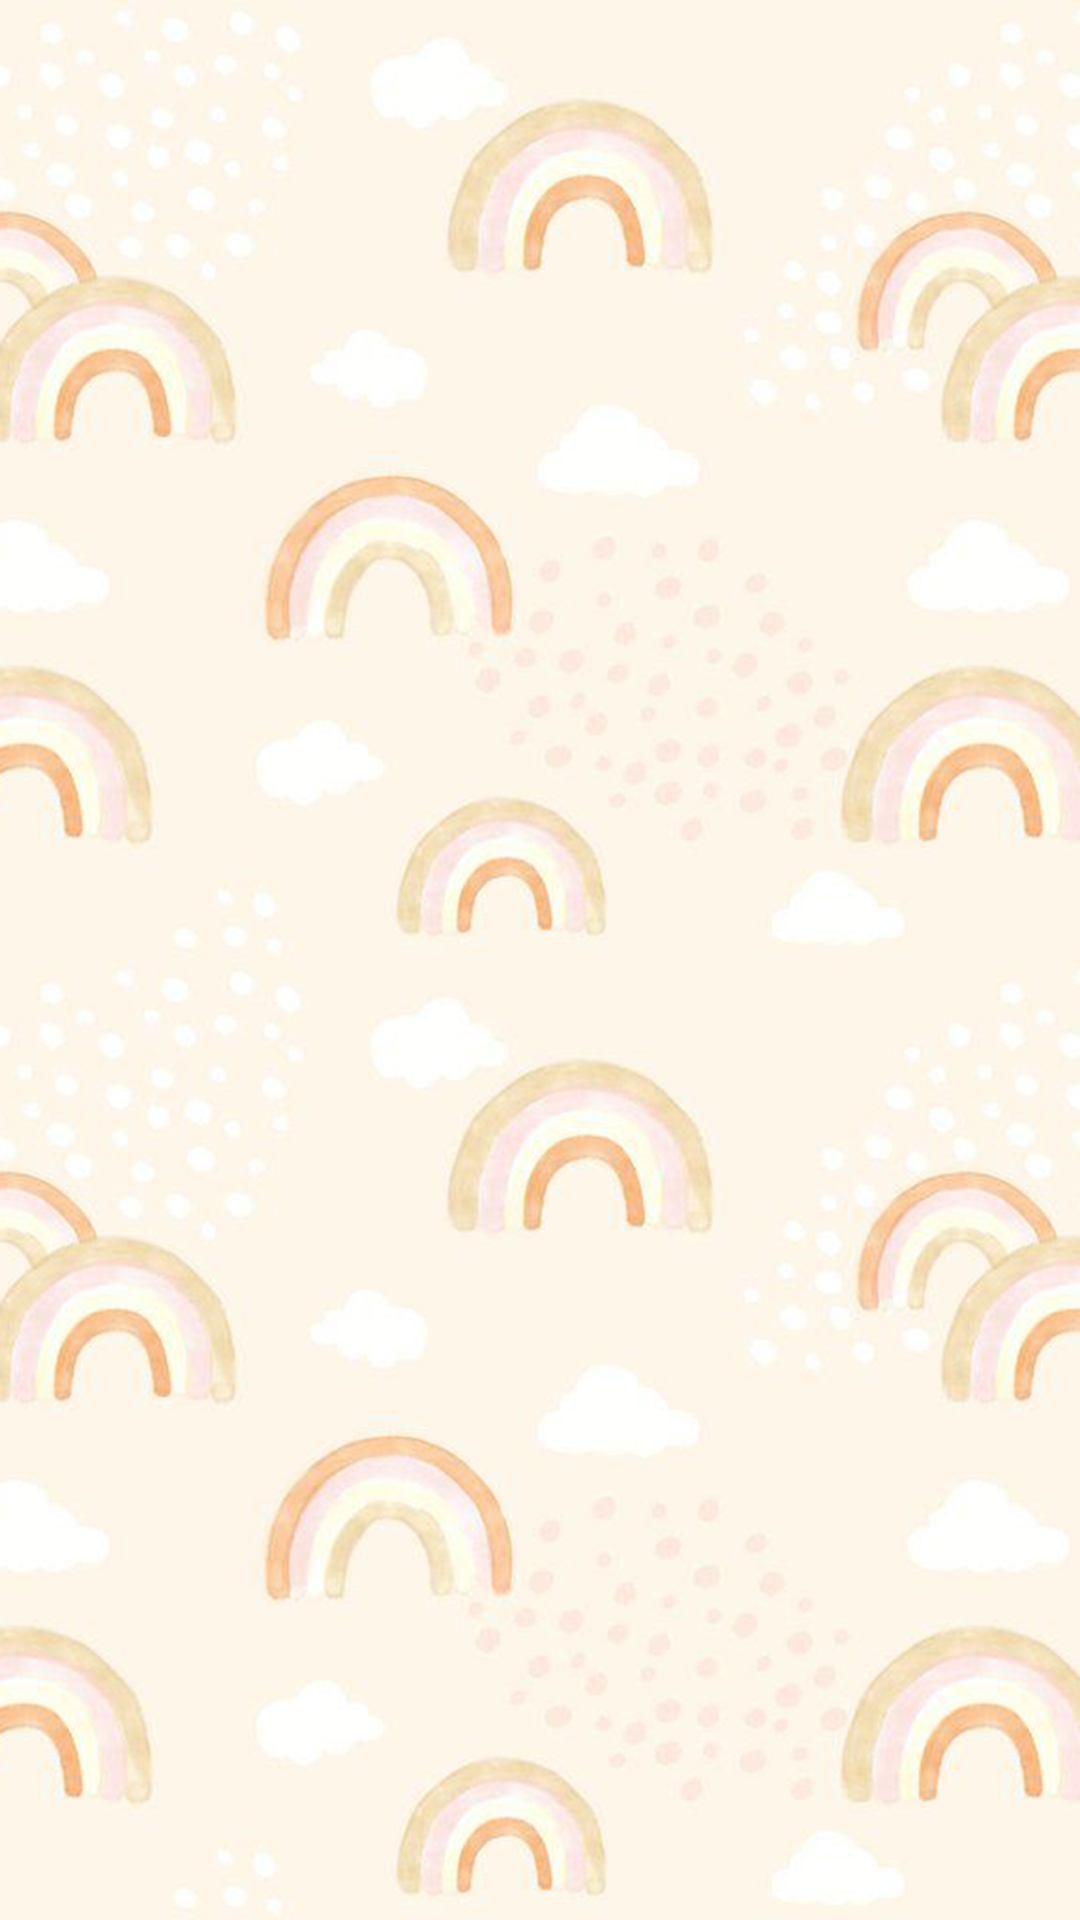 Boho Pink Rainbows Fabric Wallpaper and Home Decor  Spoonflower